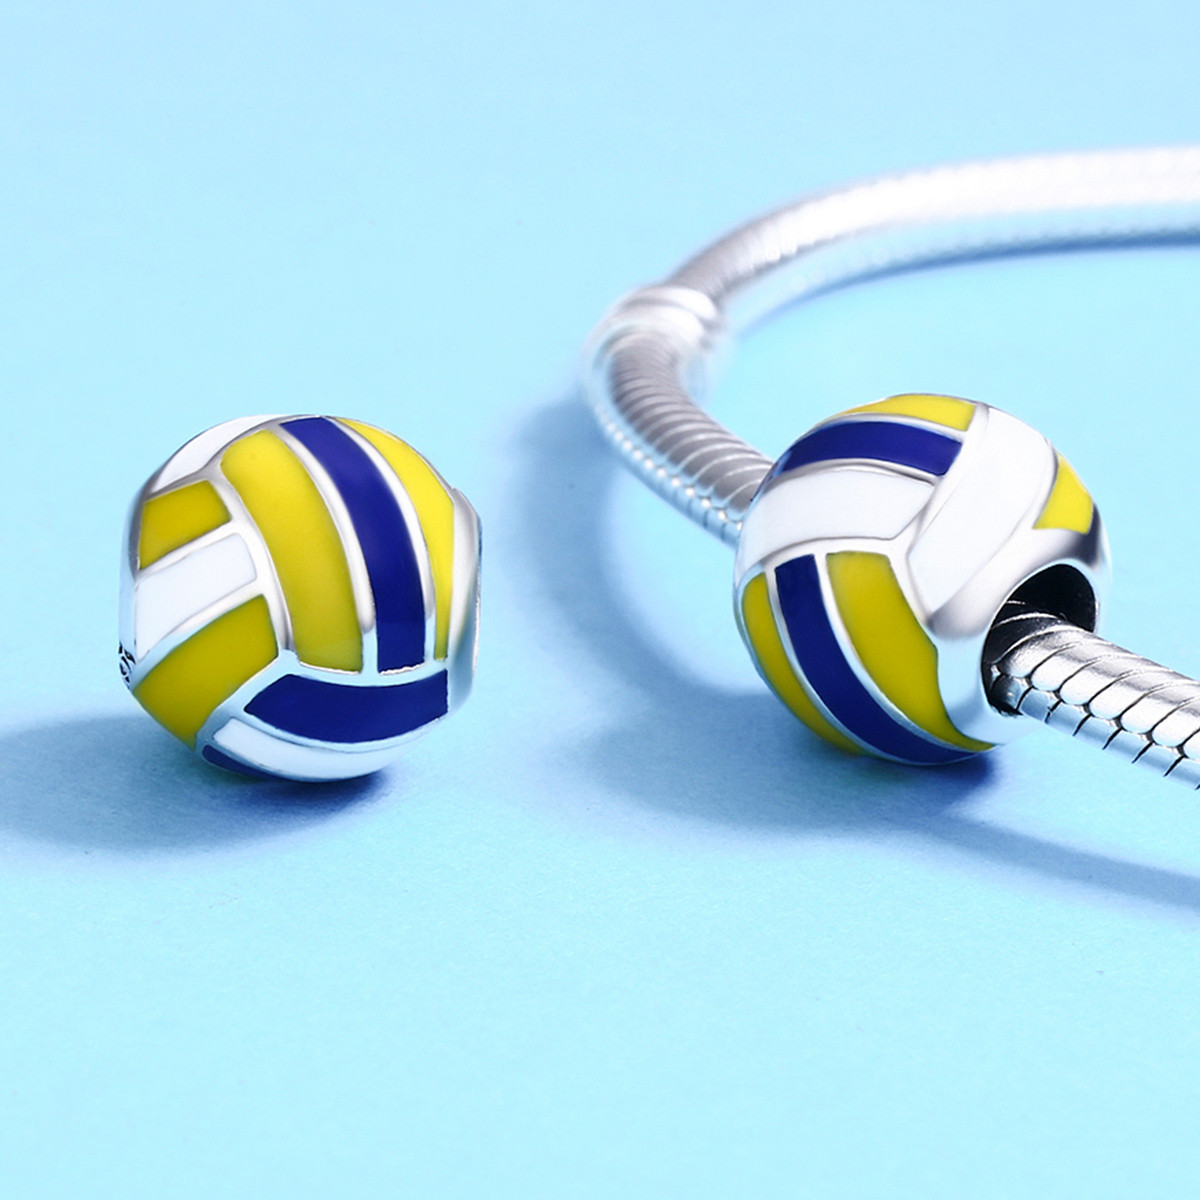 Volleyball Love Charm